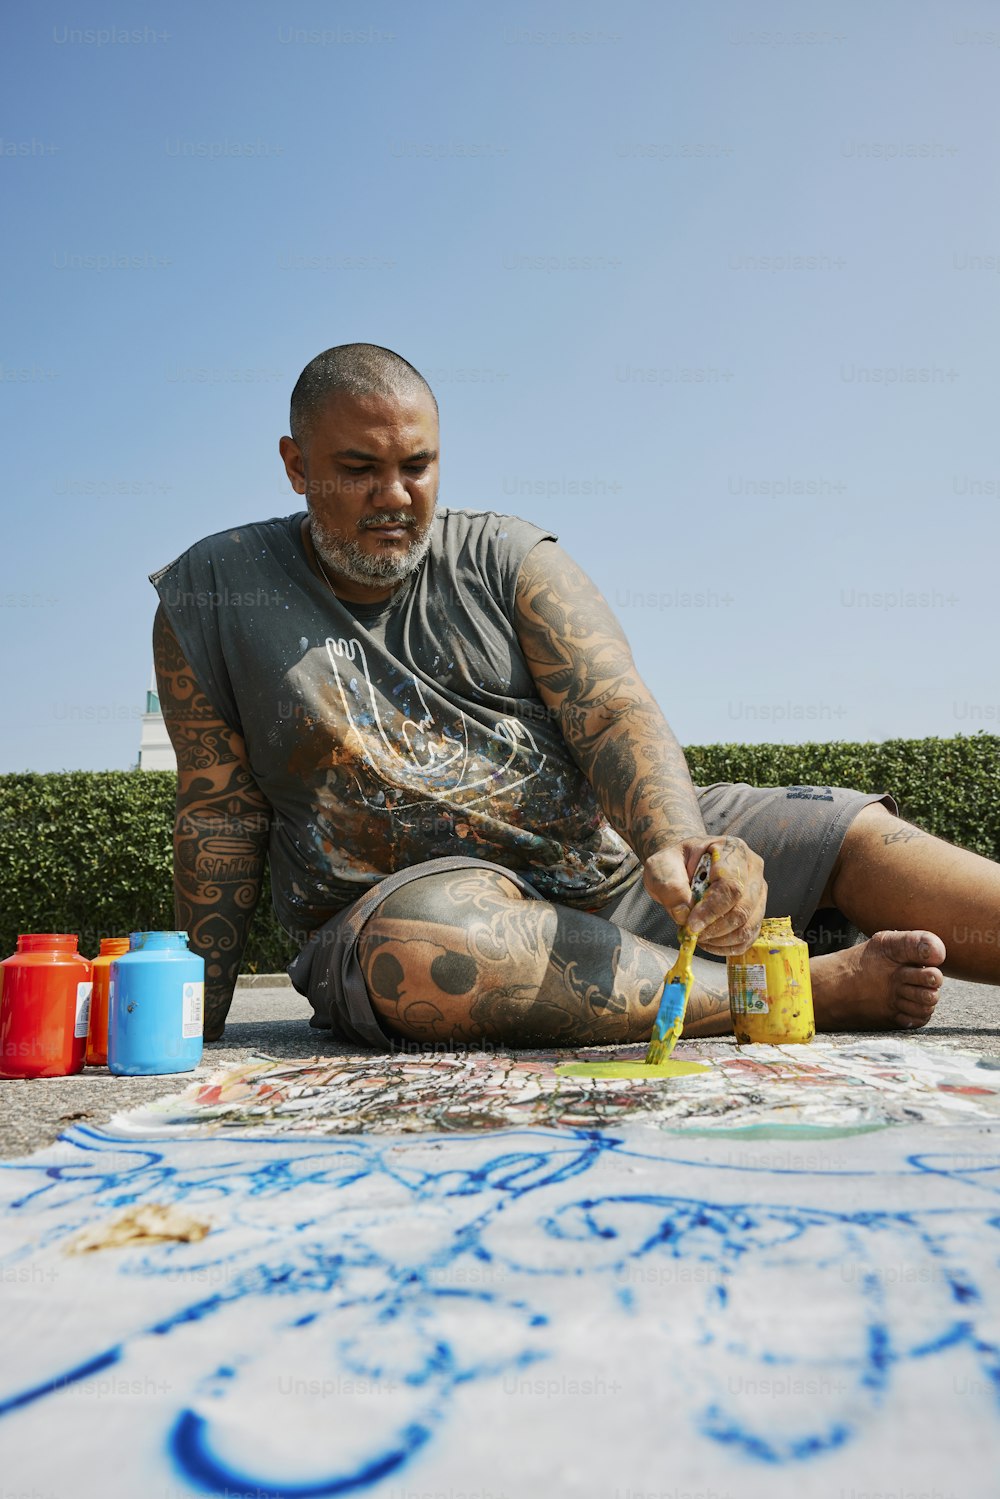 a man sitting on the ground painting on the ground